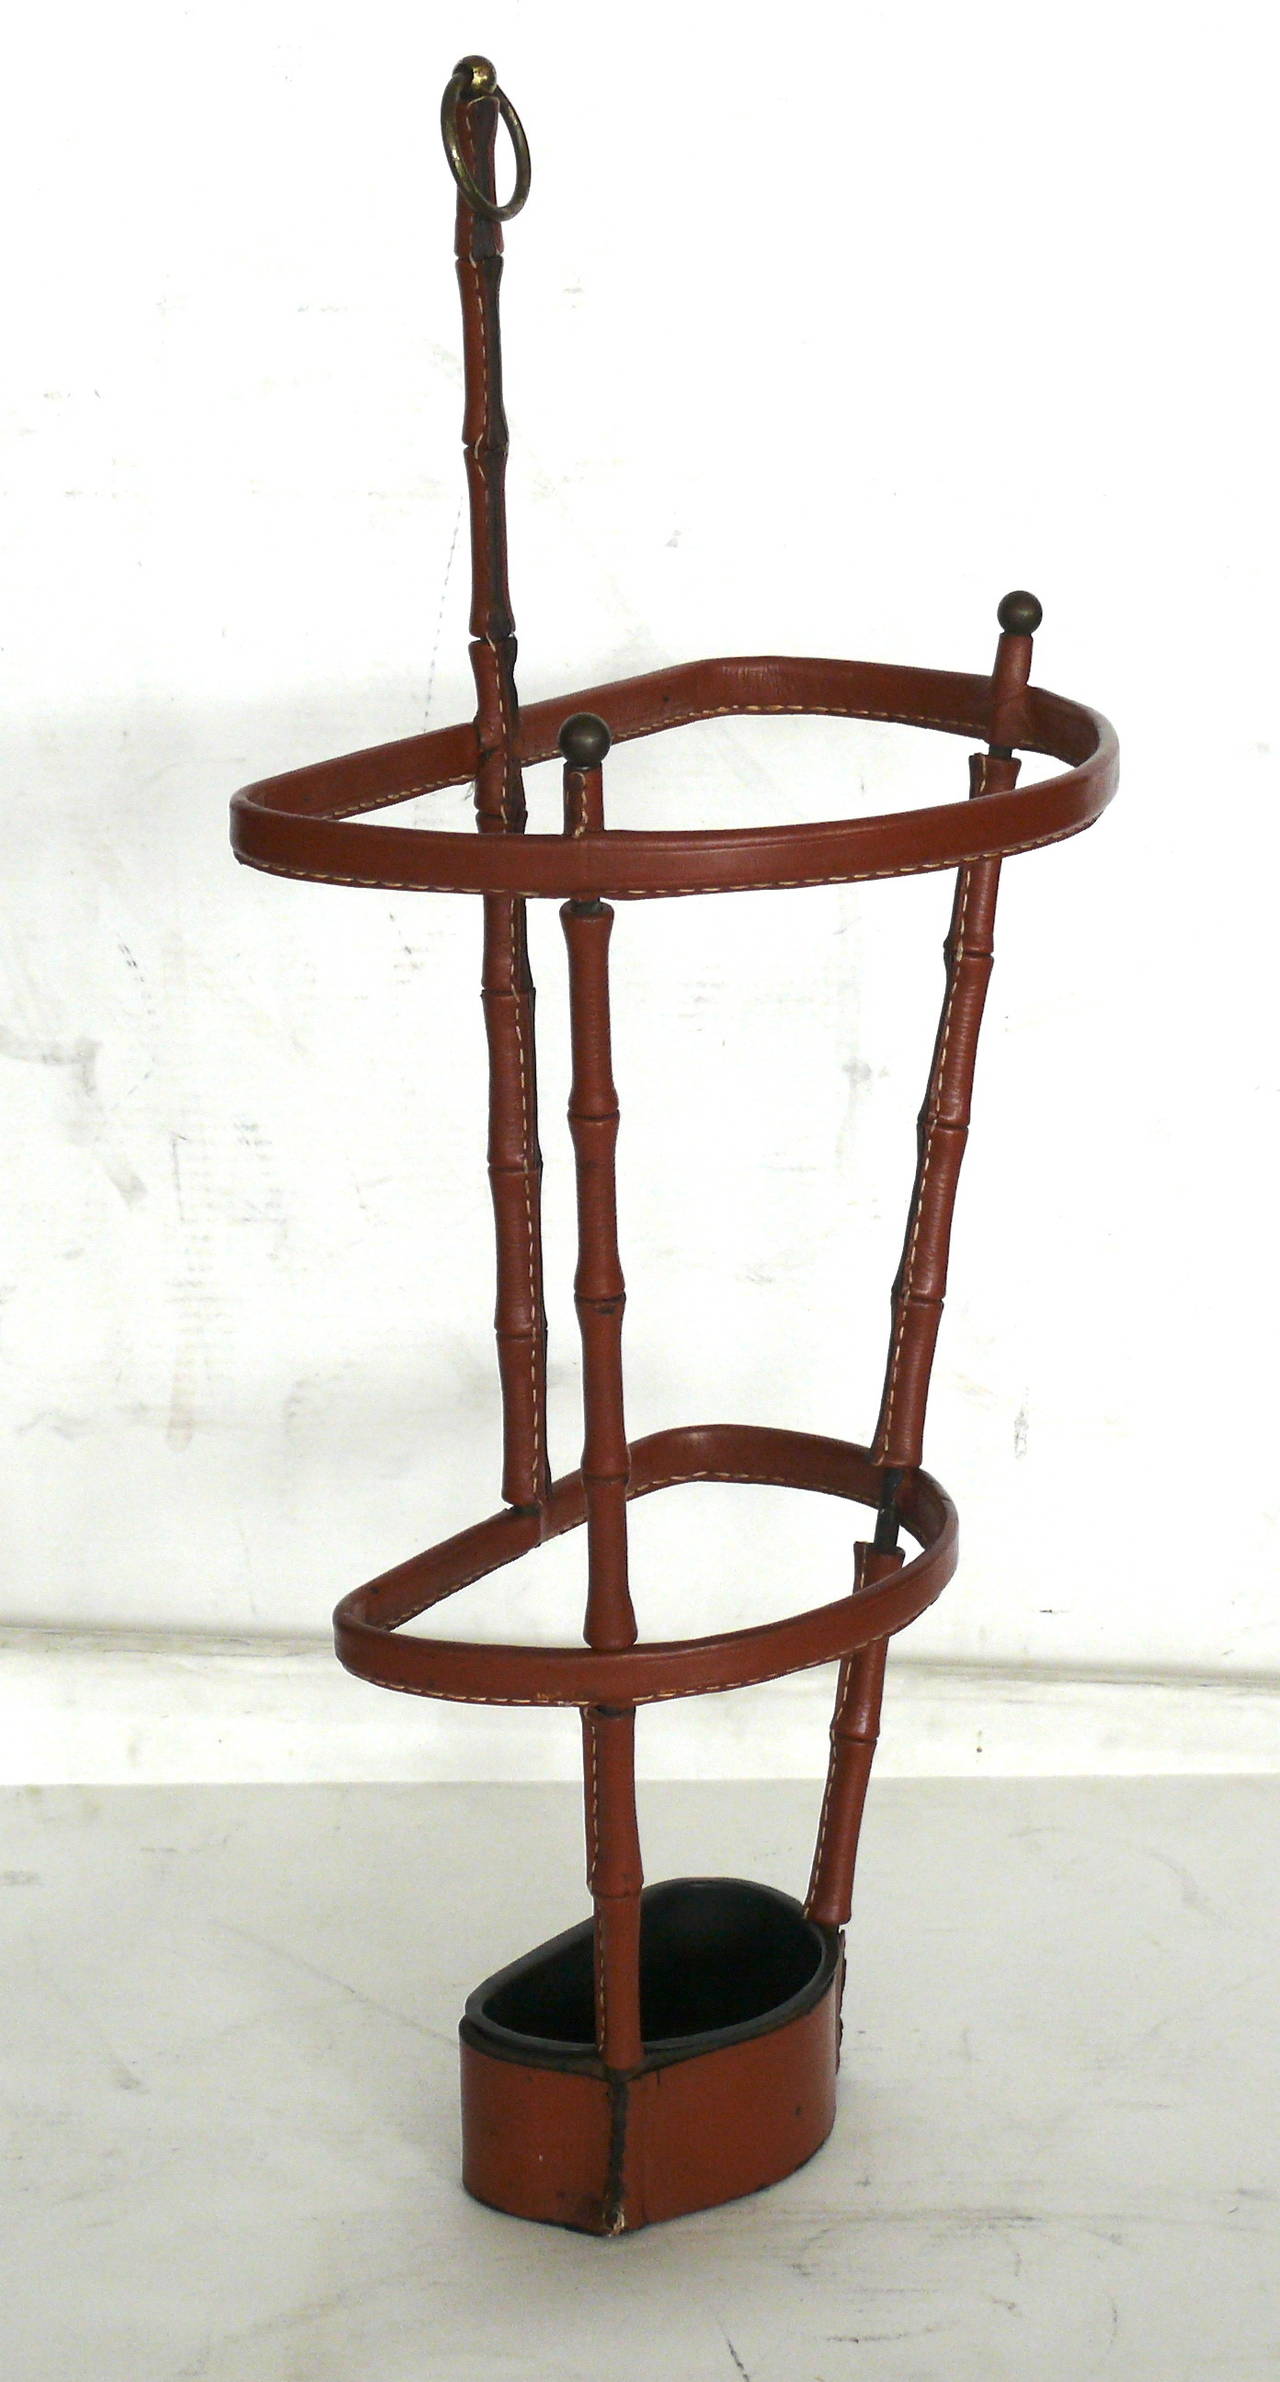 Handsome leather umbrella stand by Jacques Adnet. Saddle leather has signature Adnet contrast stitching and beautiful patina. Inset iron dish at the base to collect water. Excellent vintage condition. Very rare piece.